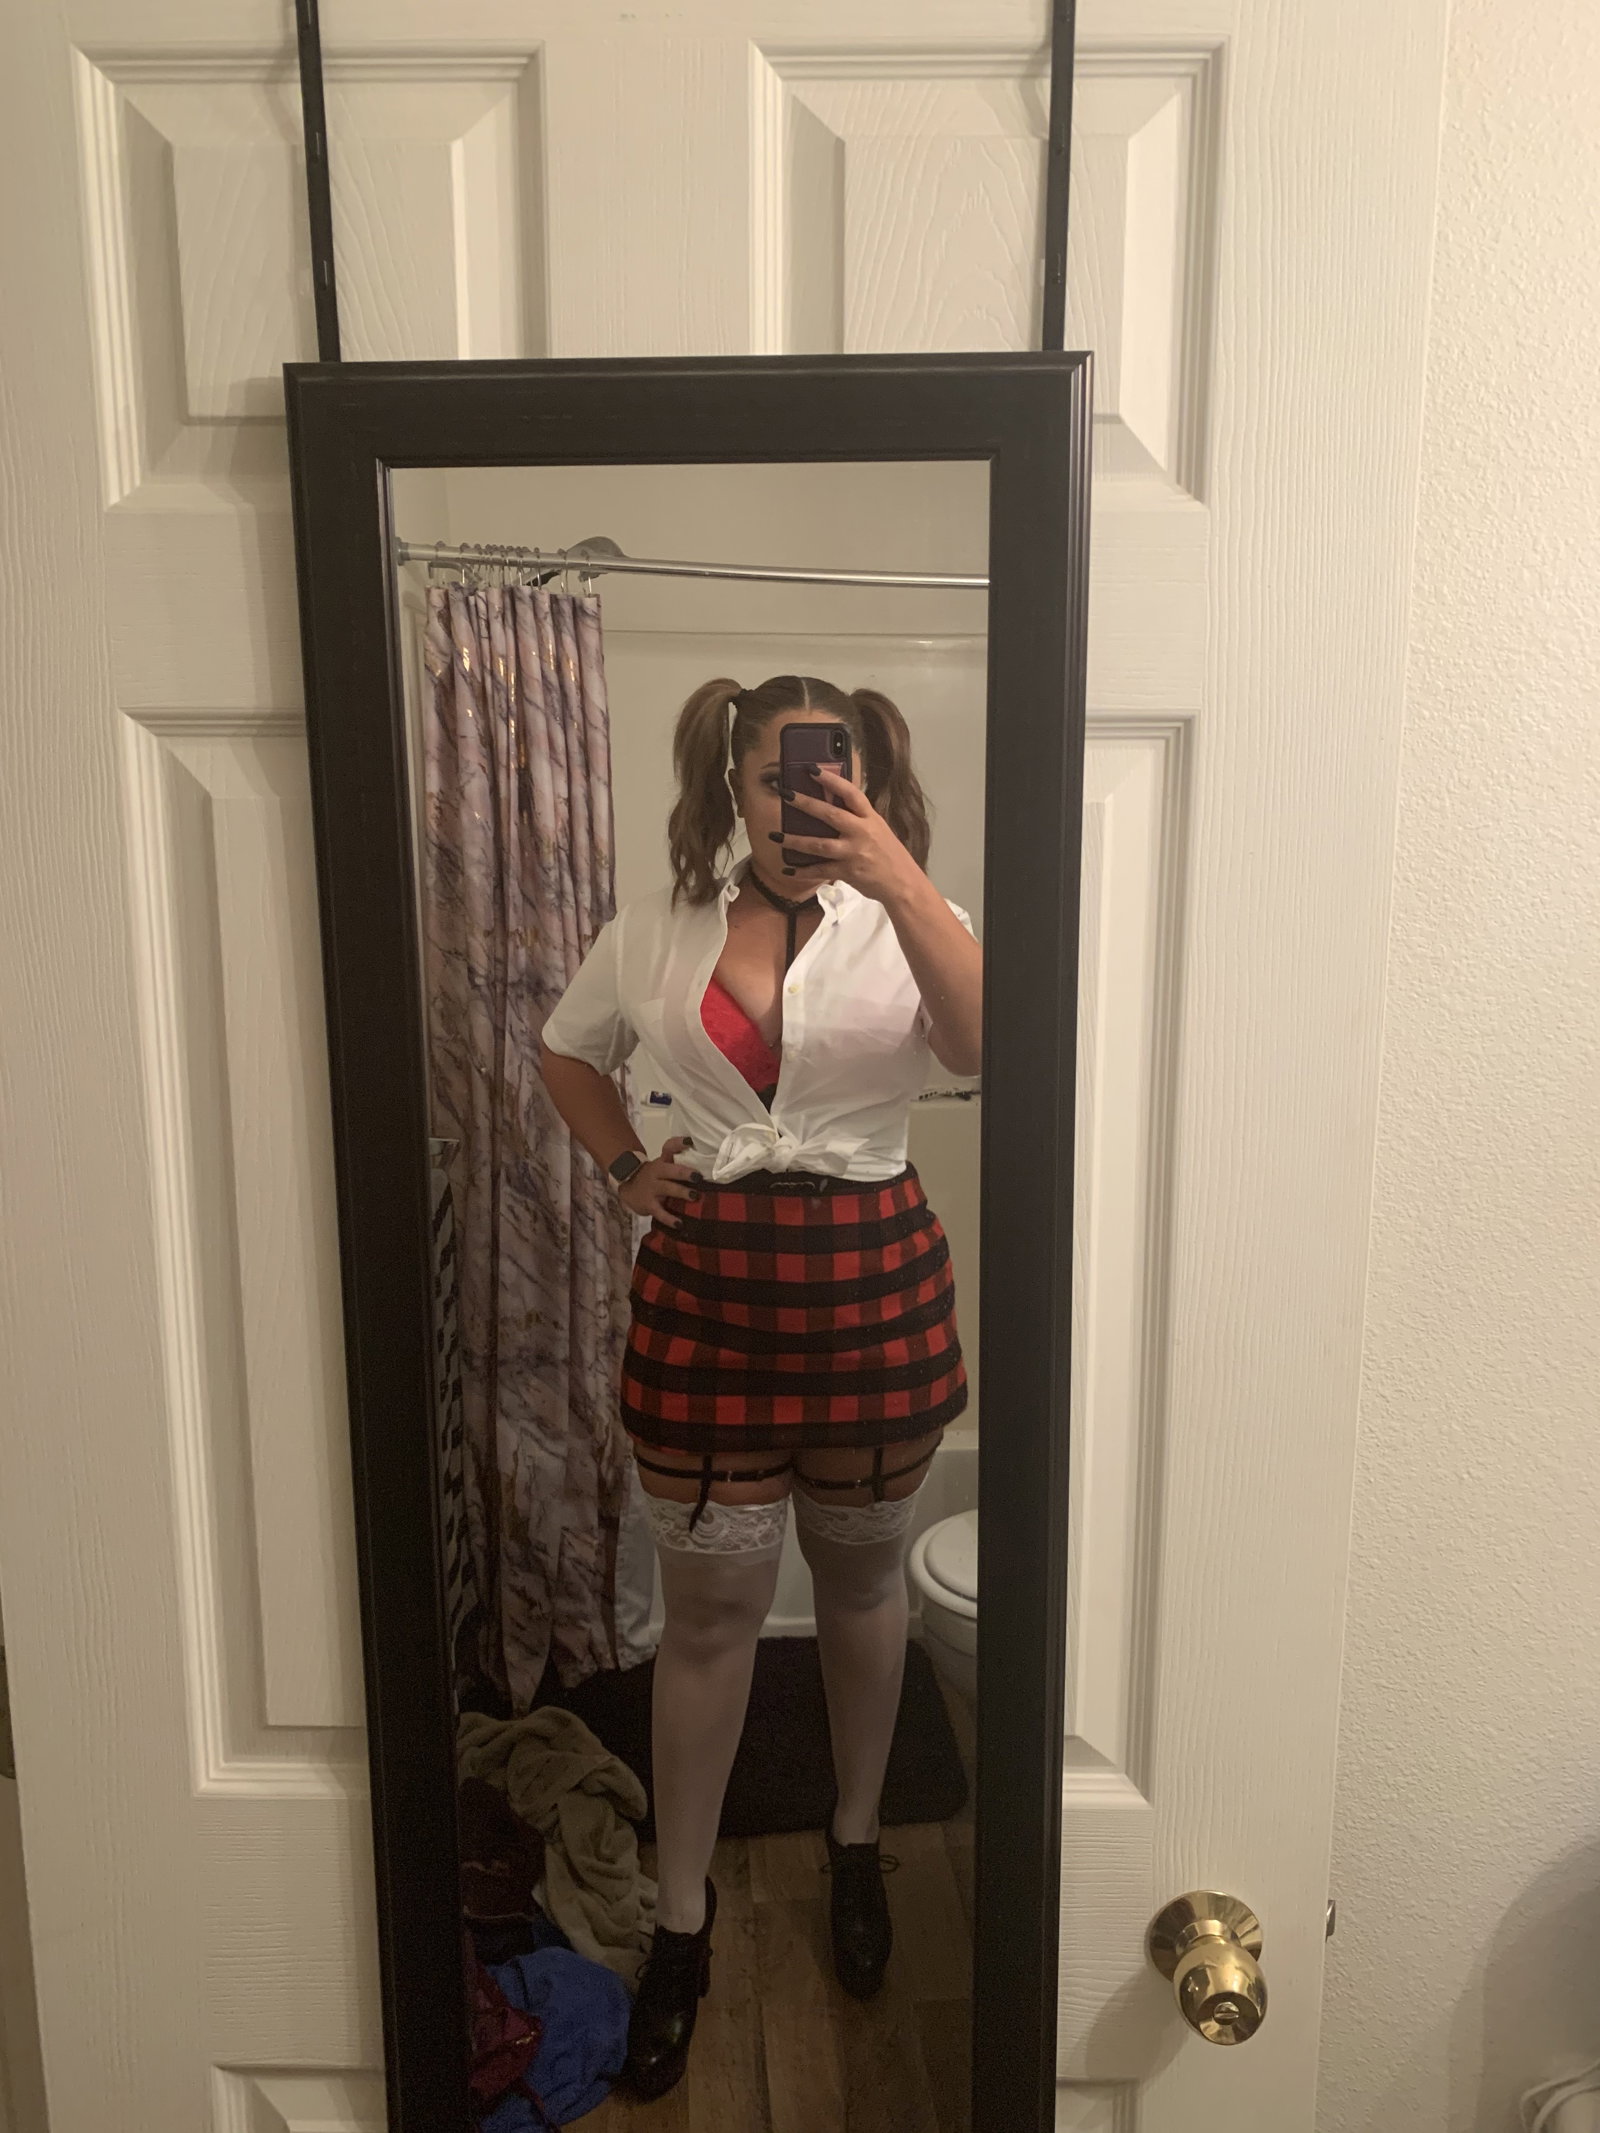 Photo by Imhisvixen with the username @ImHisVixen, who is a star user,  October 29, 2019 at 4:52 AM. The post is about the topic Hotwife and the text says 'Layer 0-3 of my schoolgirl Halloween outfit.
I went out with @shesmyvixen and he got to watch as I grinded on another man and he grabbed my ass. He also got my number and begged me to come home.
I also got a woman's number because her ex told her he..'